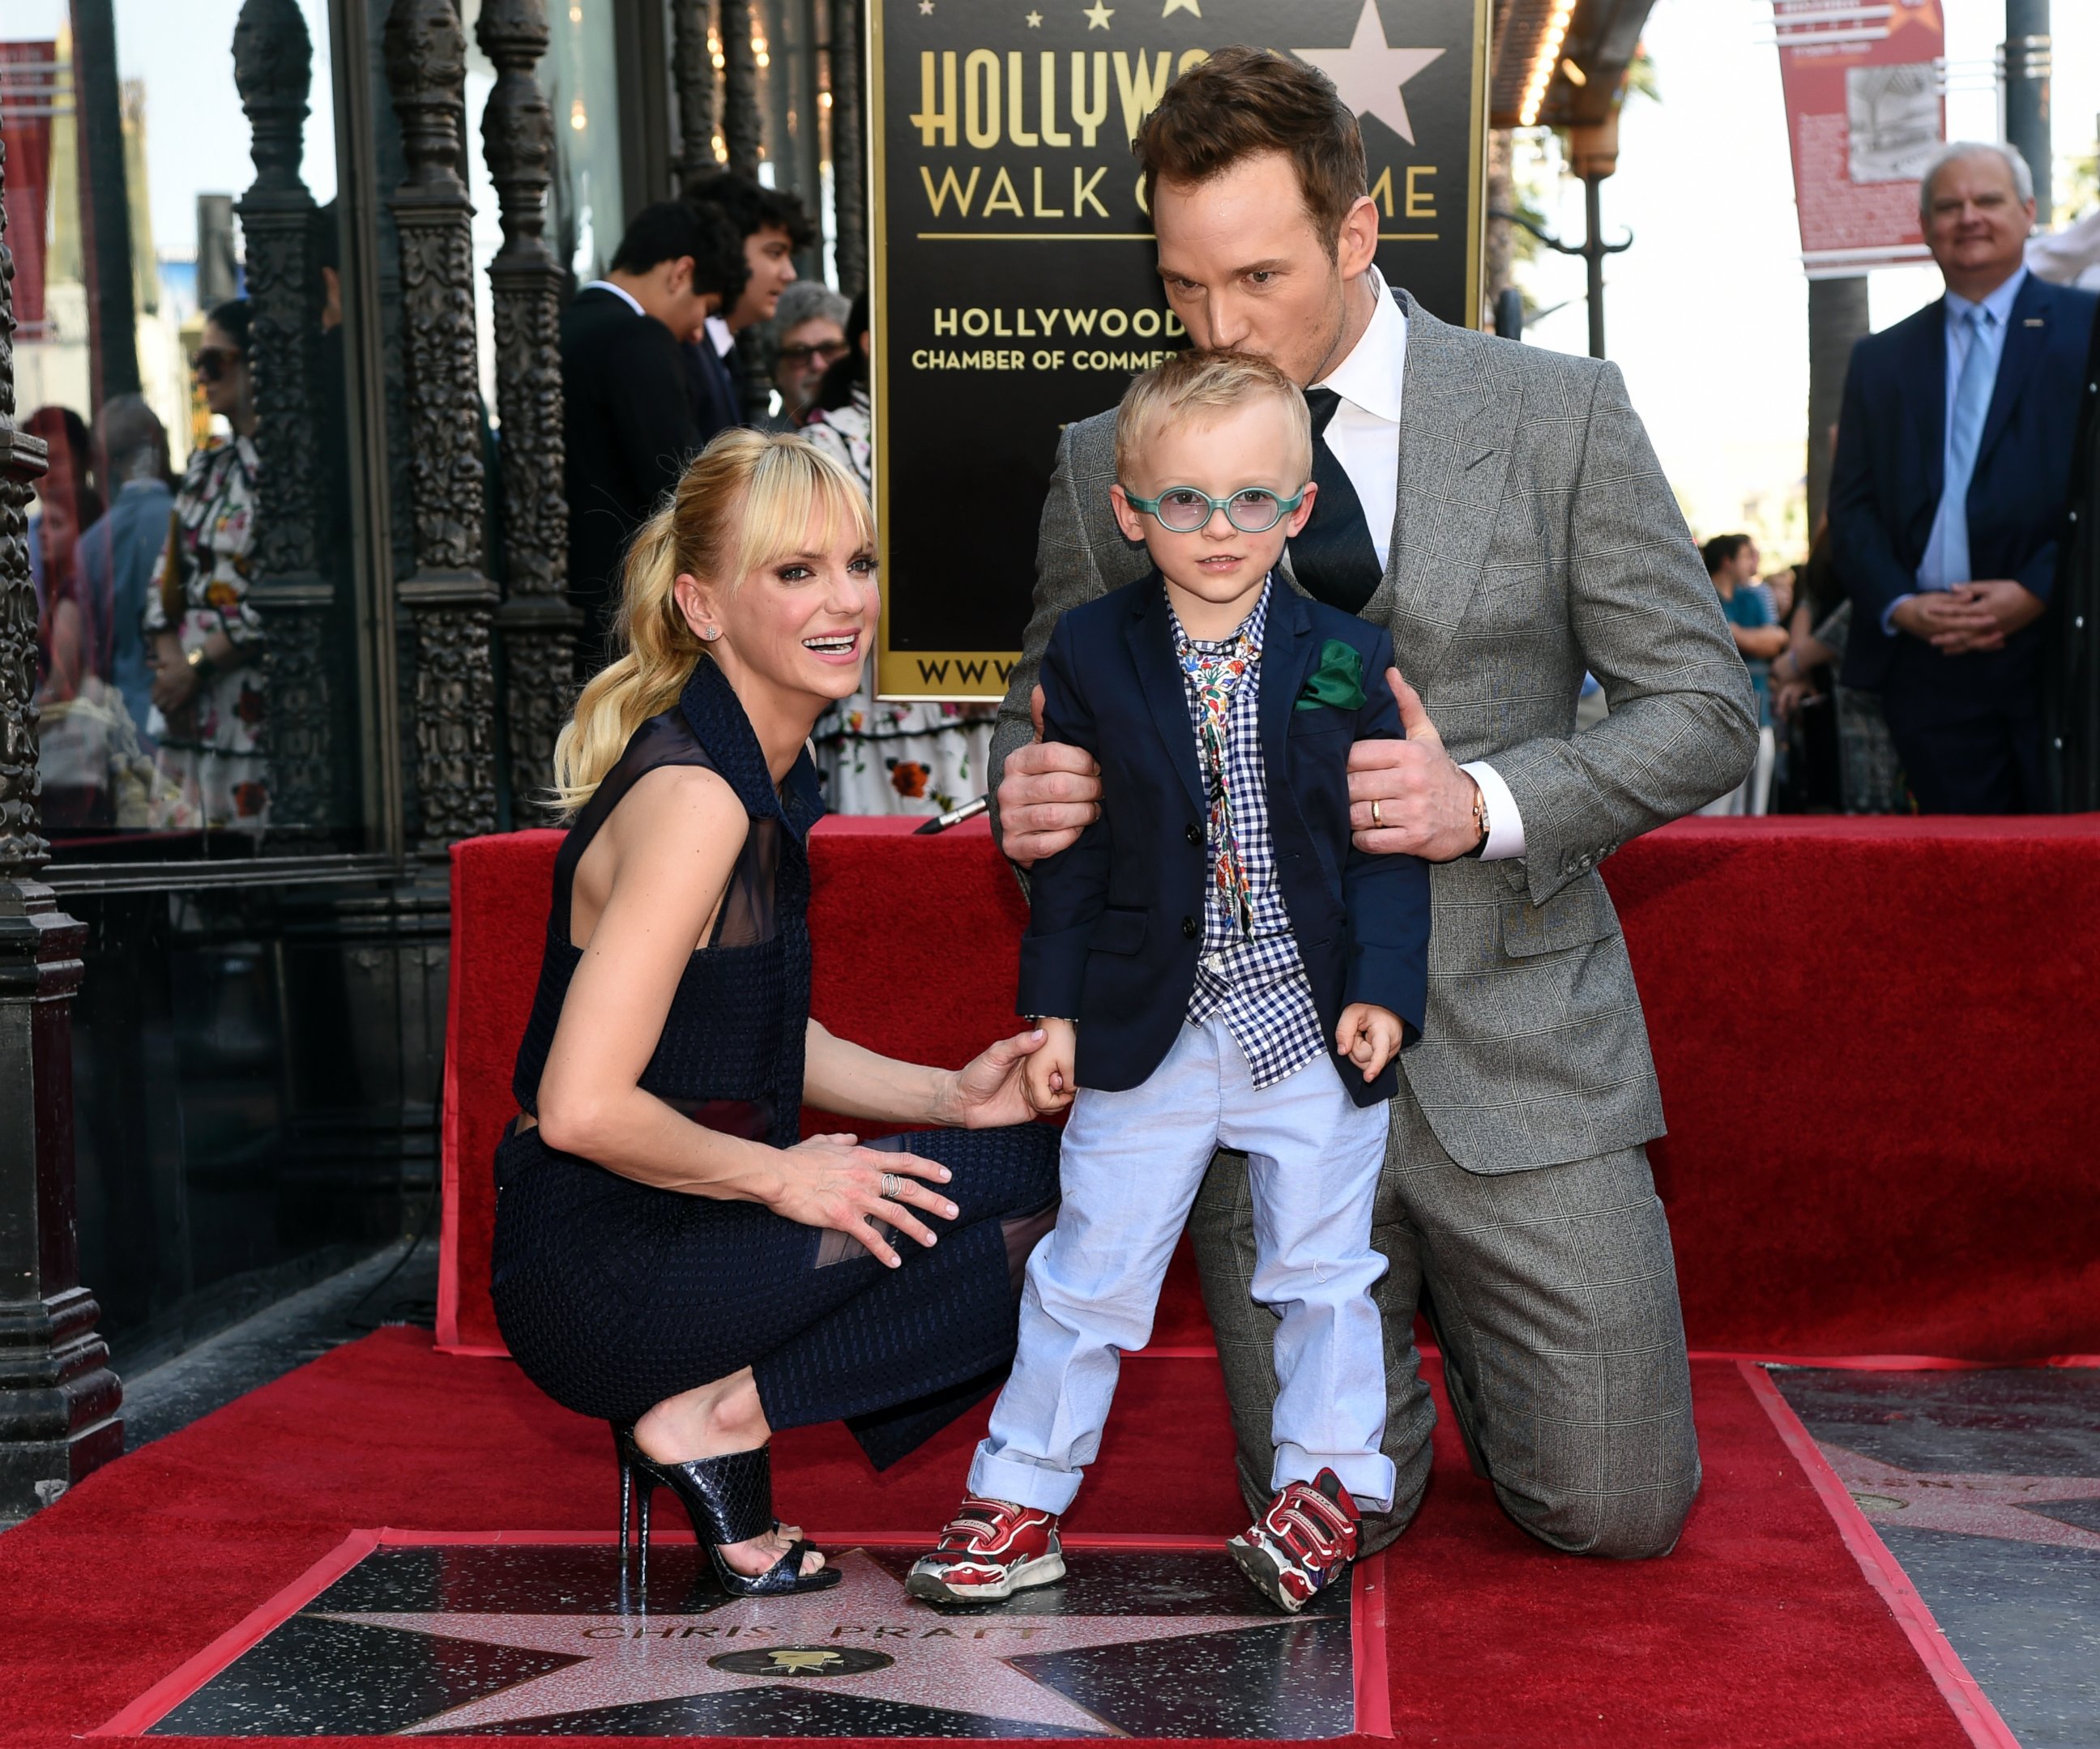 PHOTO: Chris Pratt, right, is joined by his wife, actress Anna Faris and their son Jack during a ceremony to award Pratt a star on the Hollywood Walk of Fame on Friday, April 21, 2017, in Los Angeles.